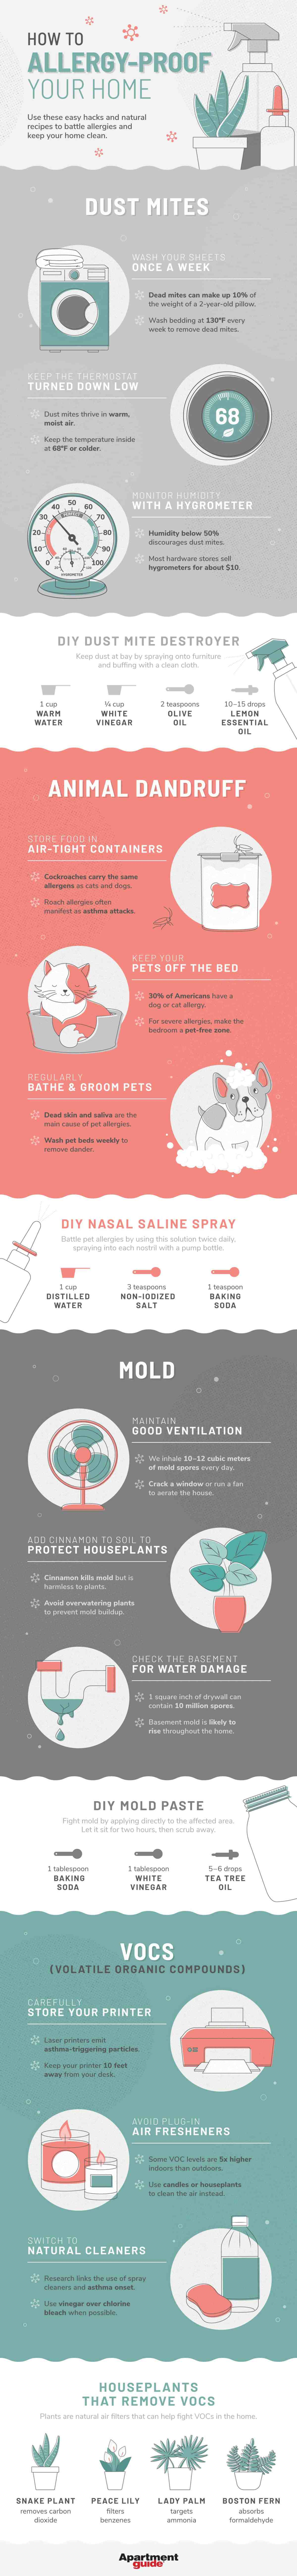 How to Allergy-Proof your Home [Visual] | ecogreenlove